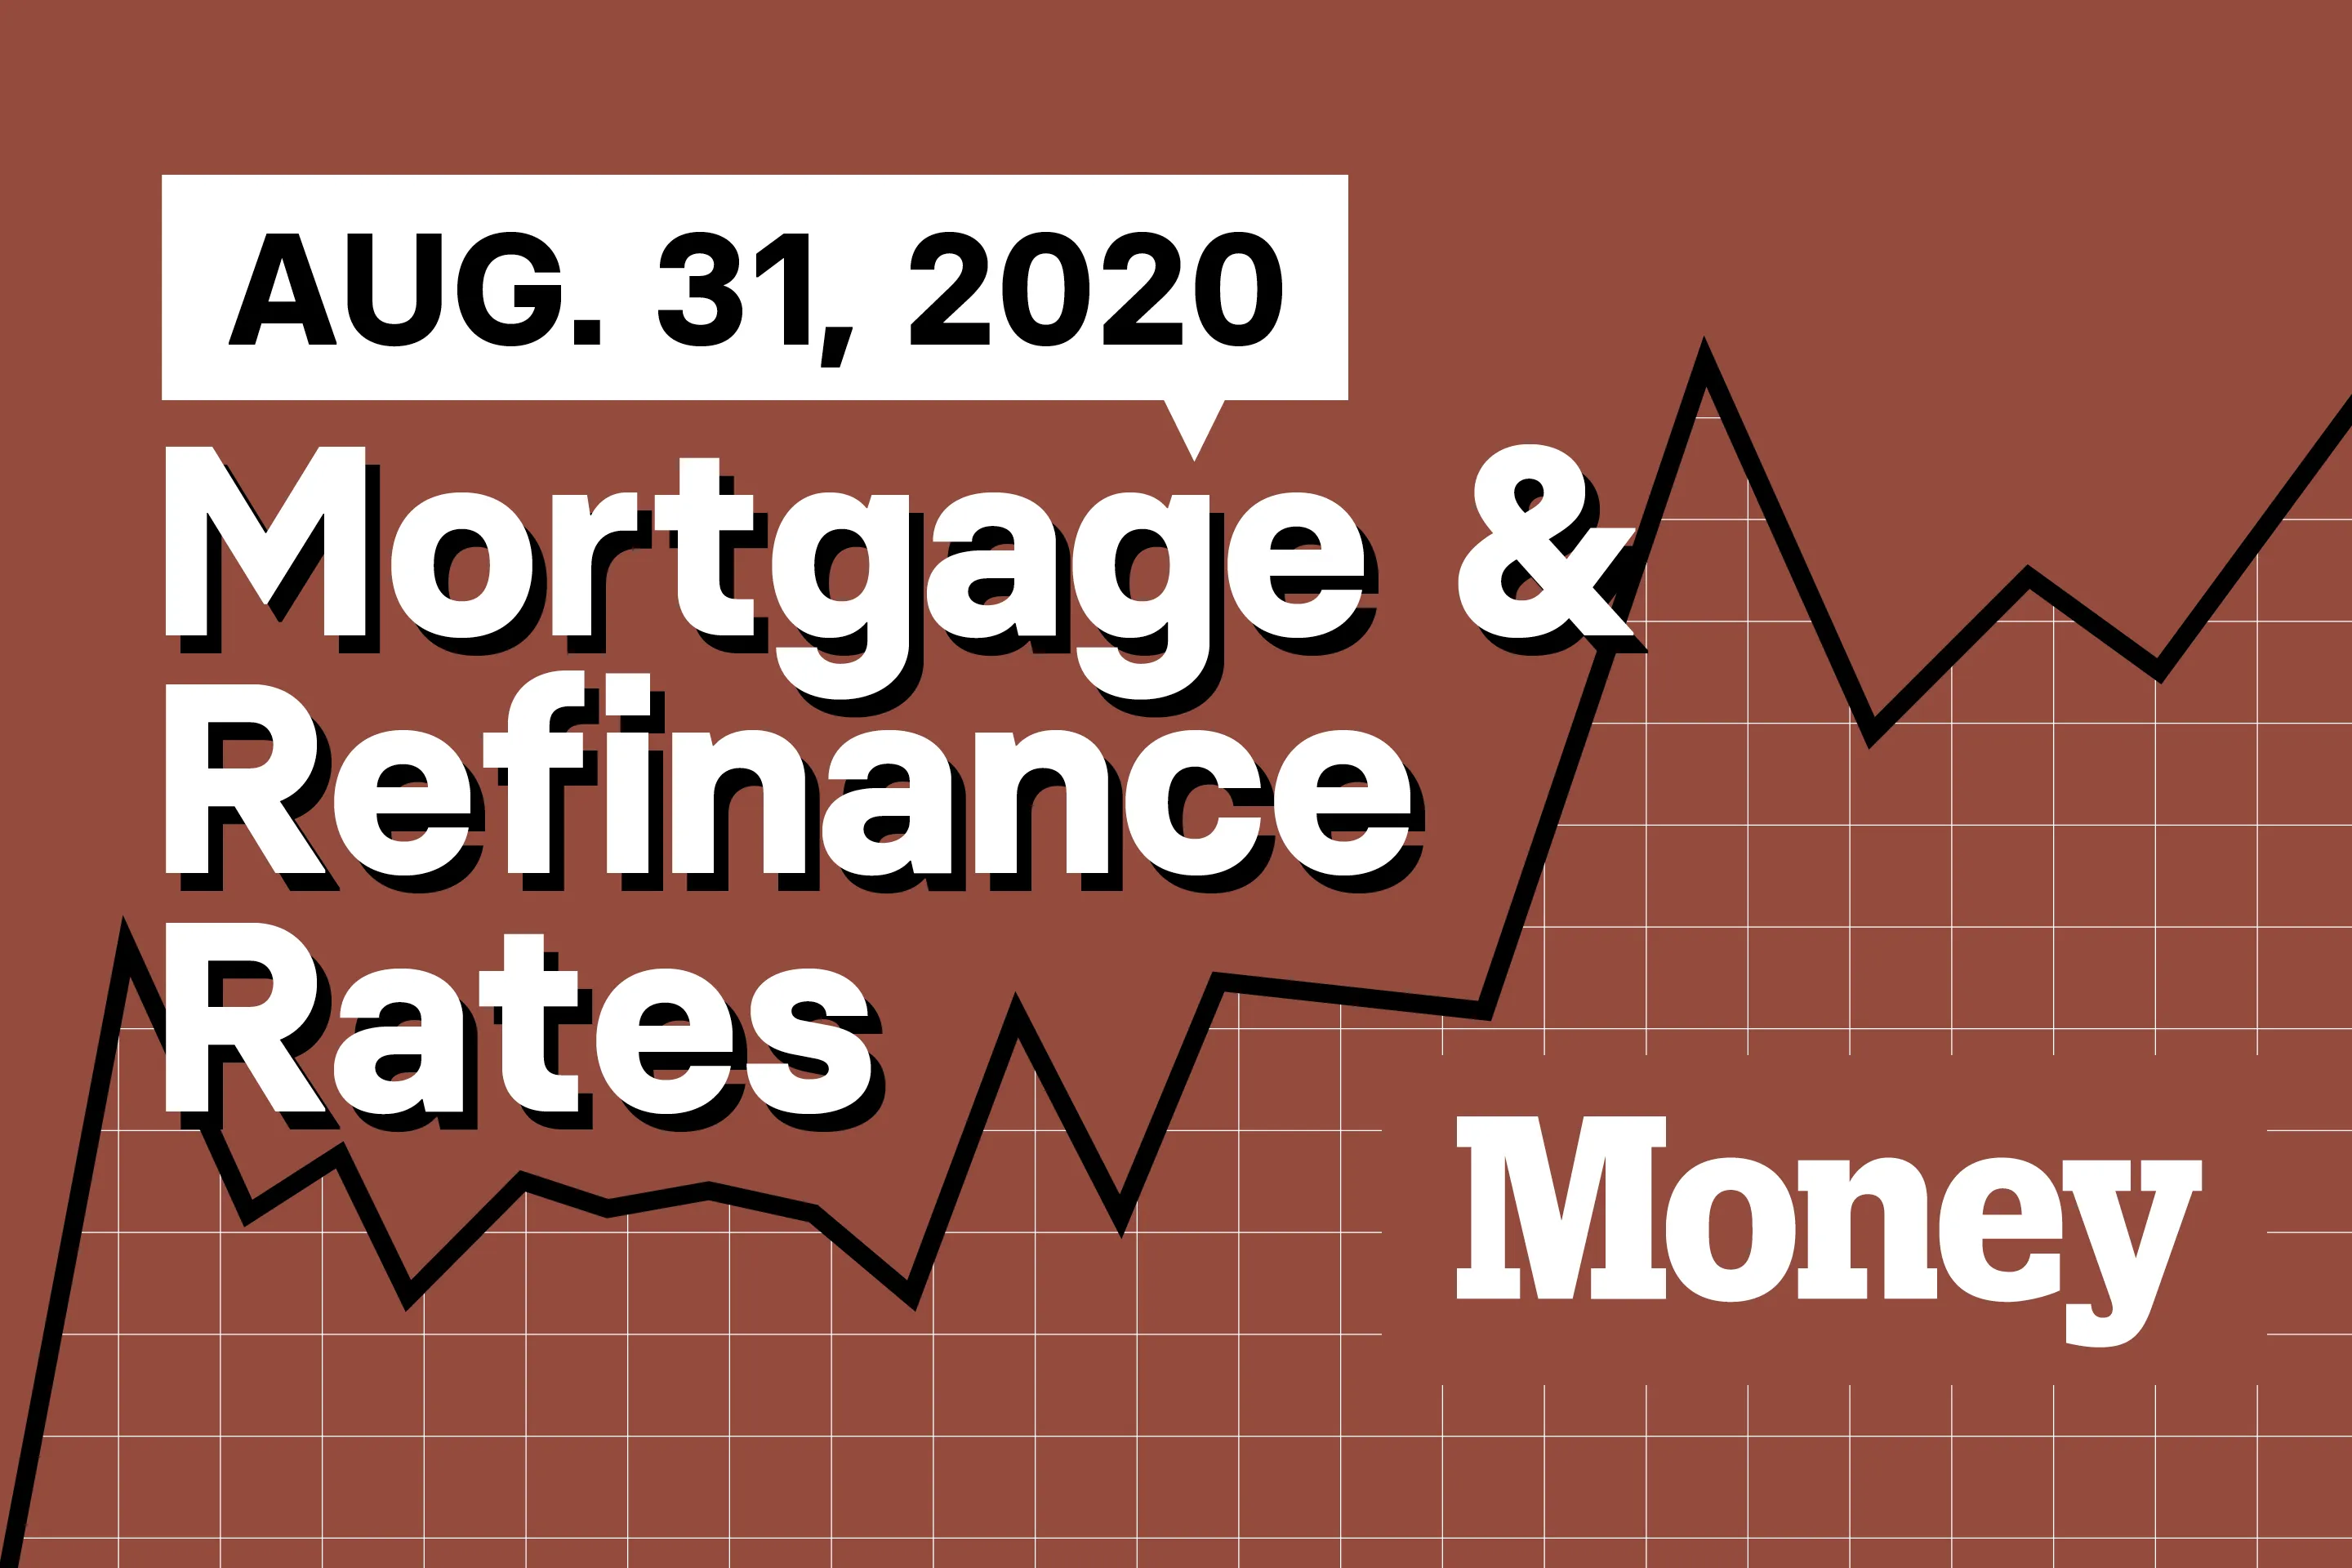 Here Are Today's Best Mortgage & Refinance Rates for August 31, 2020